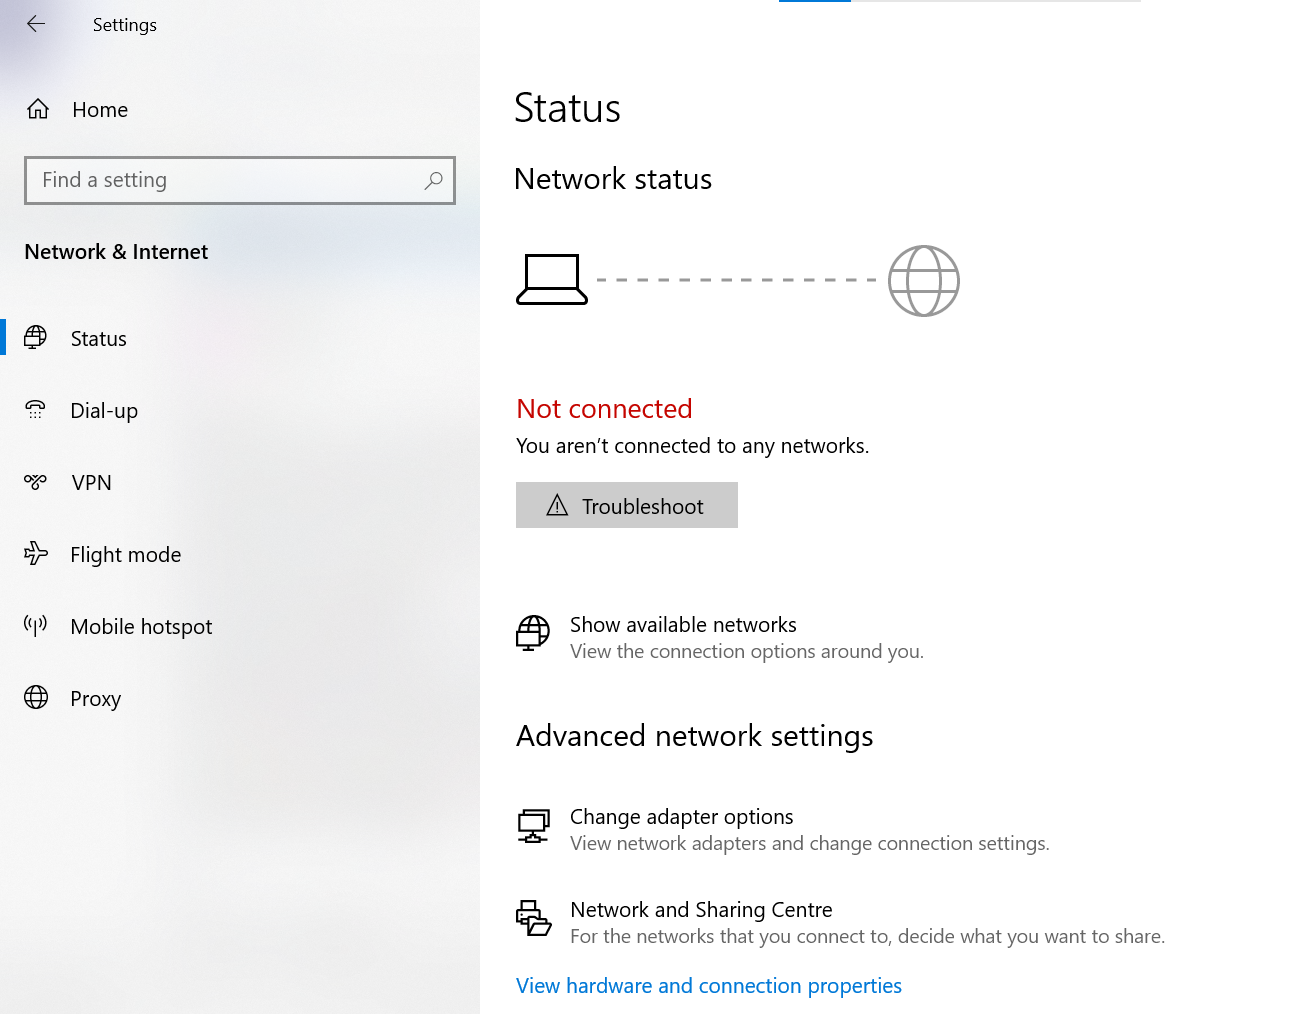 How to Add Wireless Wifi Network Manually in Windows 10 PC or Laptop 